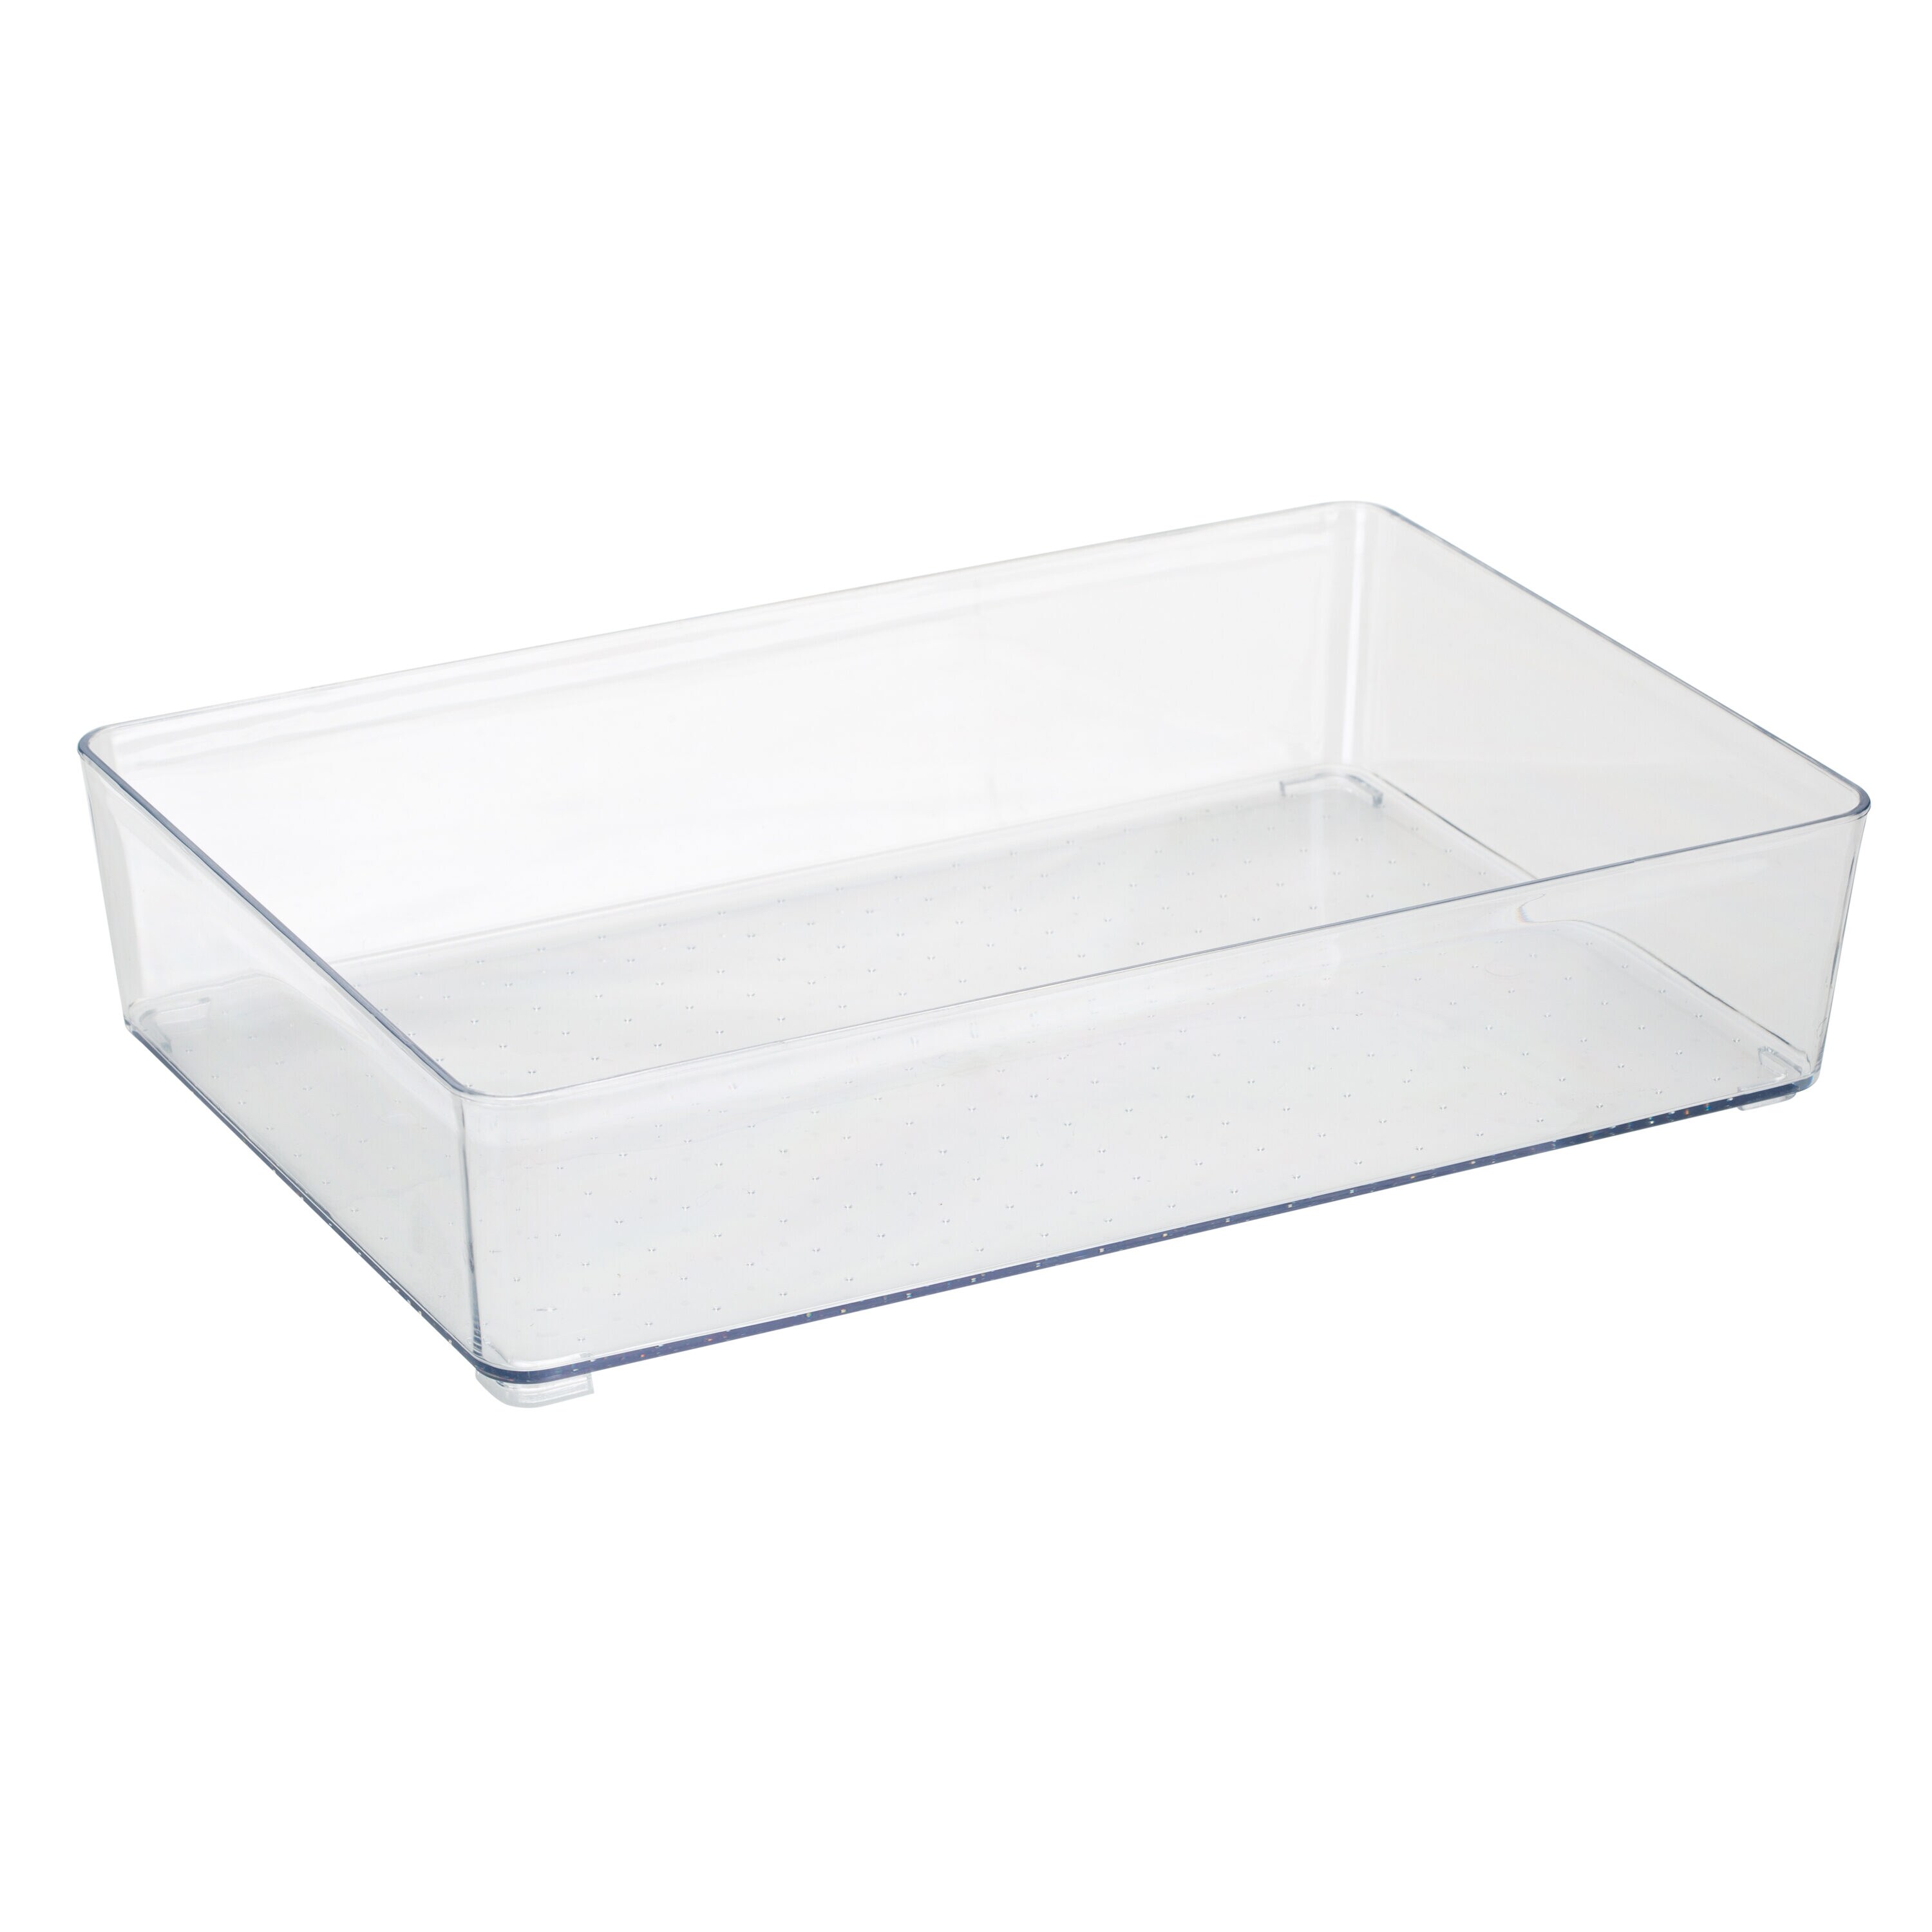 8.0 Inch Wide Drawer Organizers at